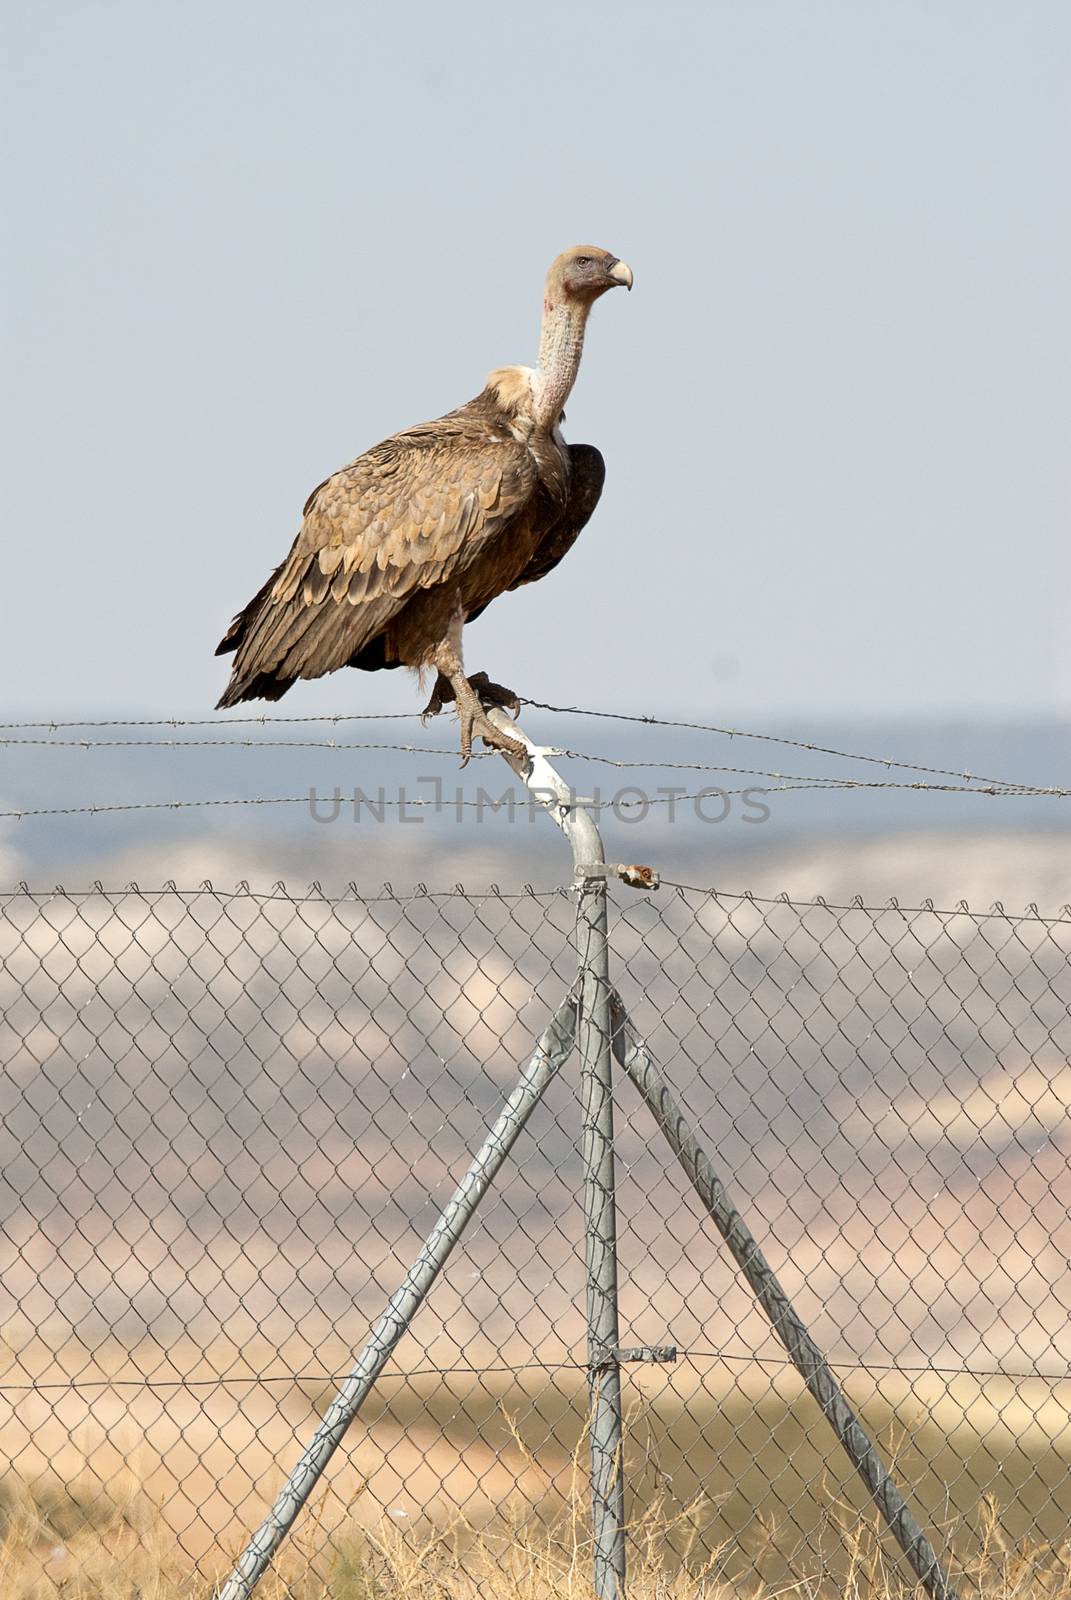 Griffon Vulture, Gyps fulvus, bird of prey standing on a fence by jalonsohu@gmail.com